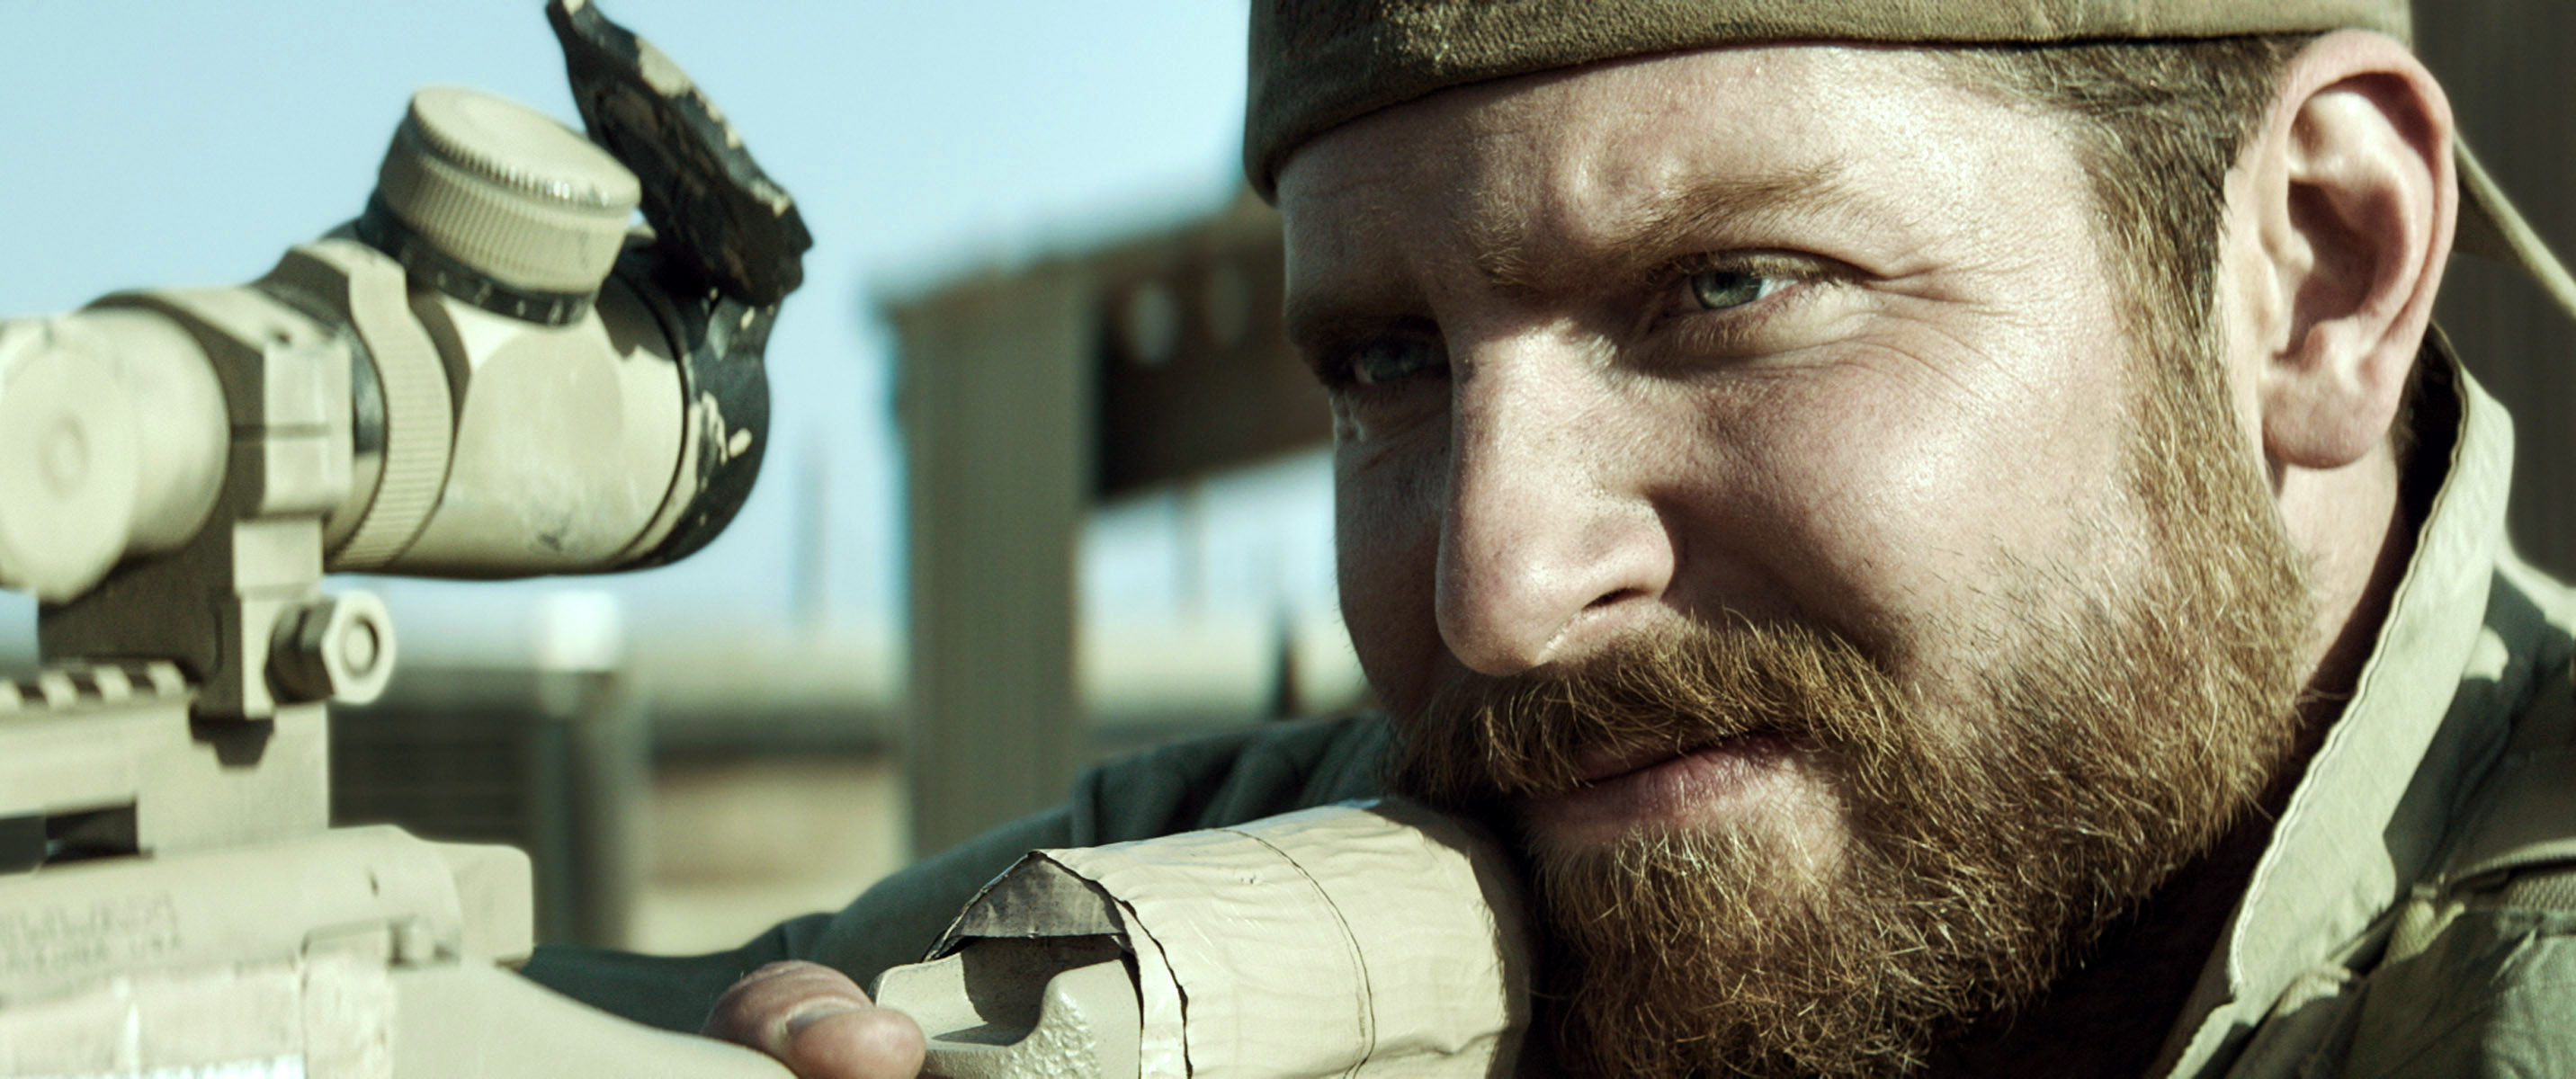 ‘American Sniper’ to be shown at University of Maryland after controversy